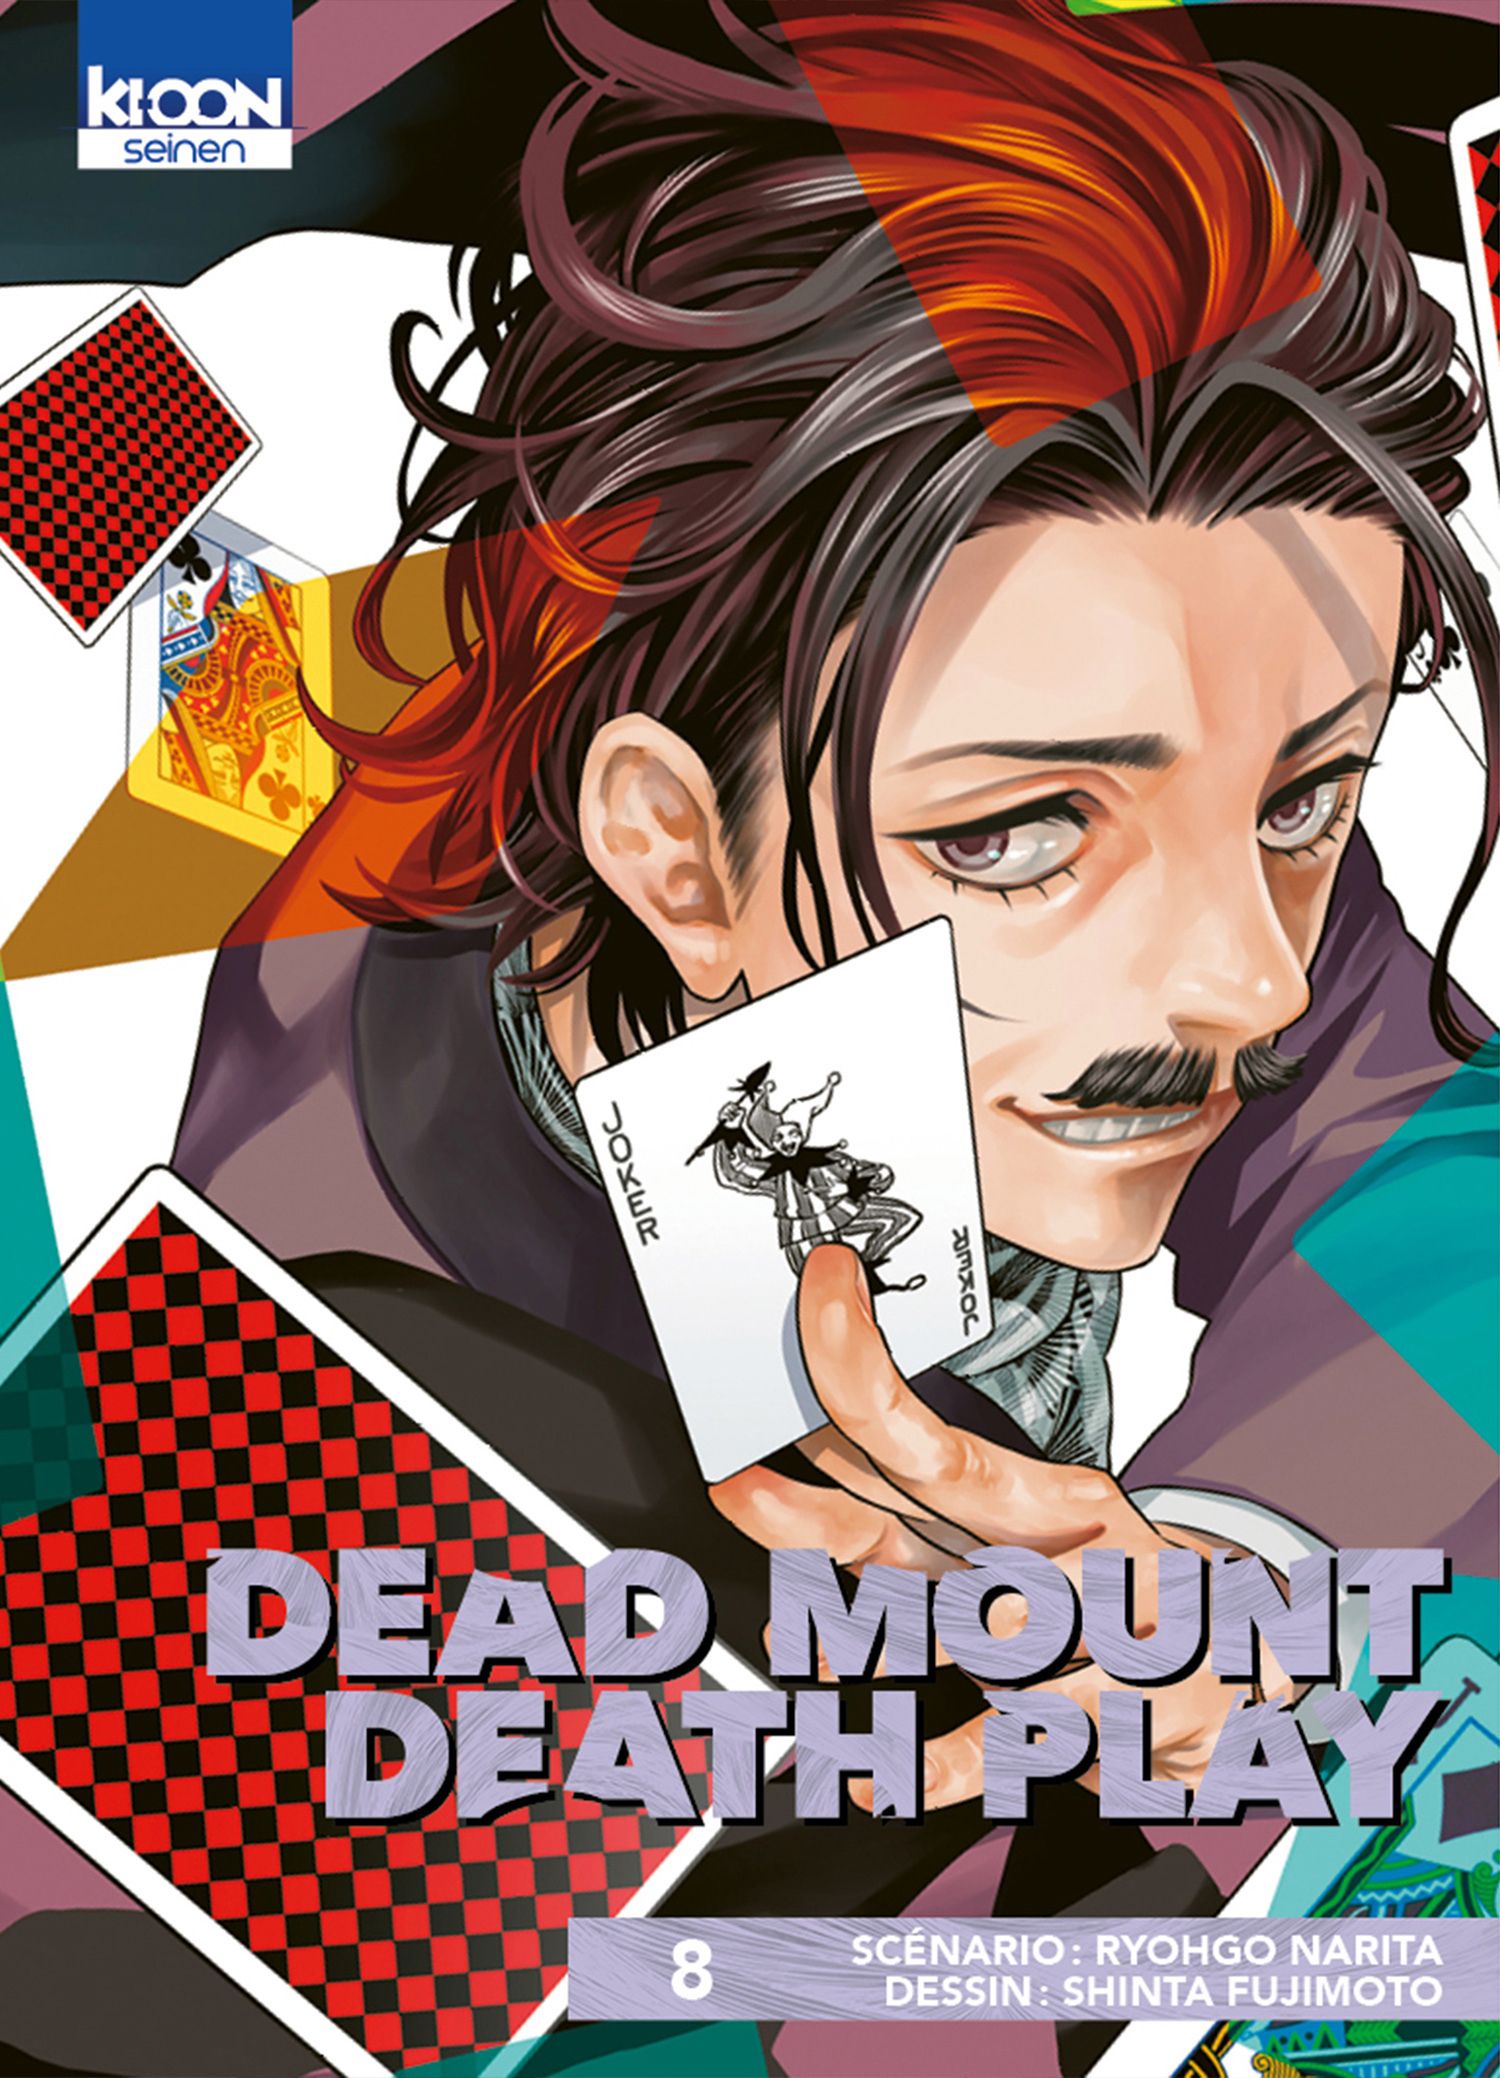 Dead Mount Death Play Episode 3 Review - But Why Tho?